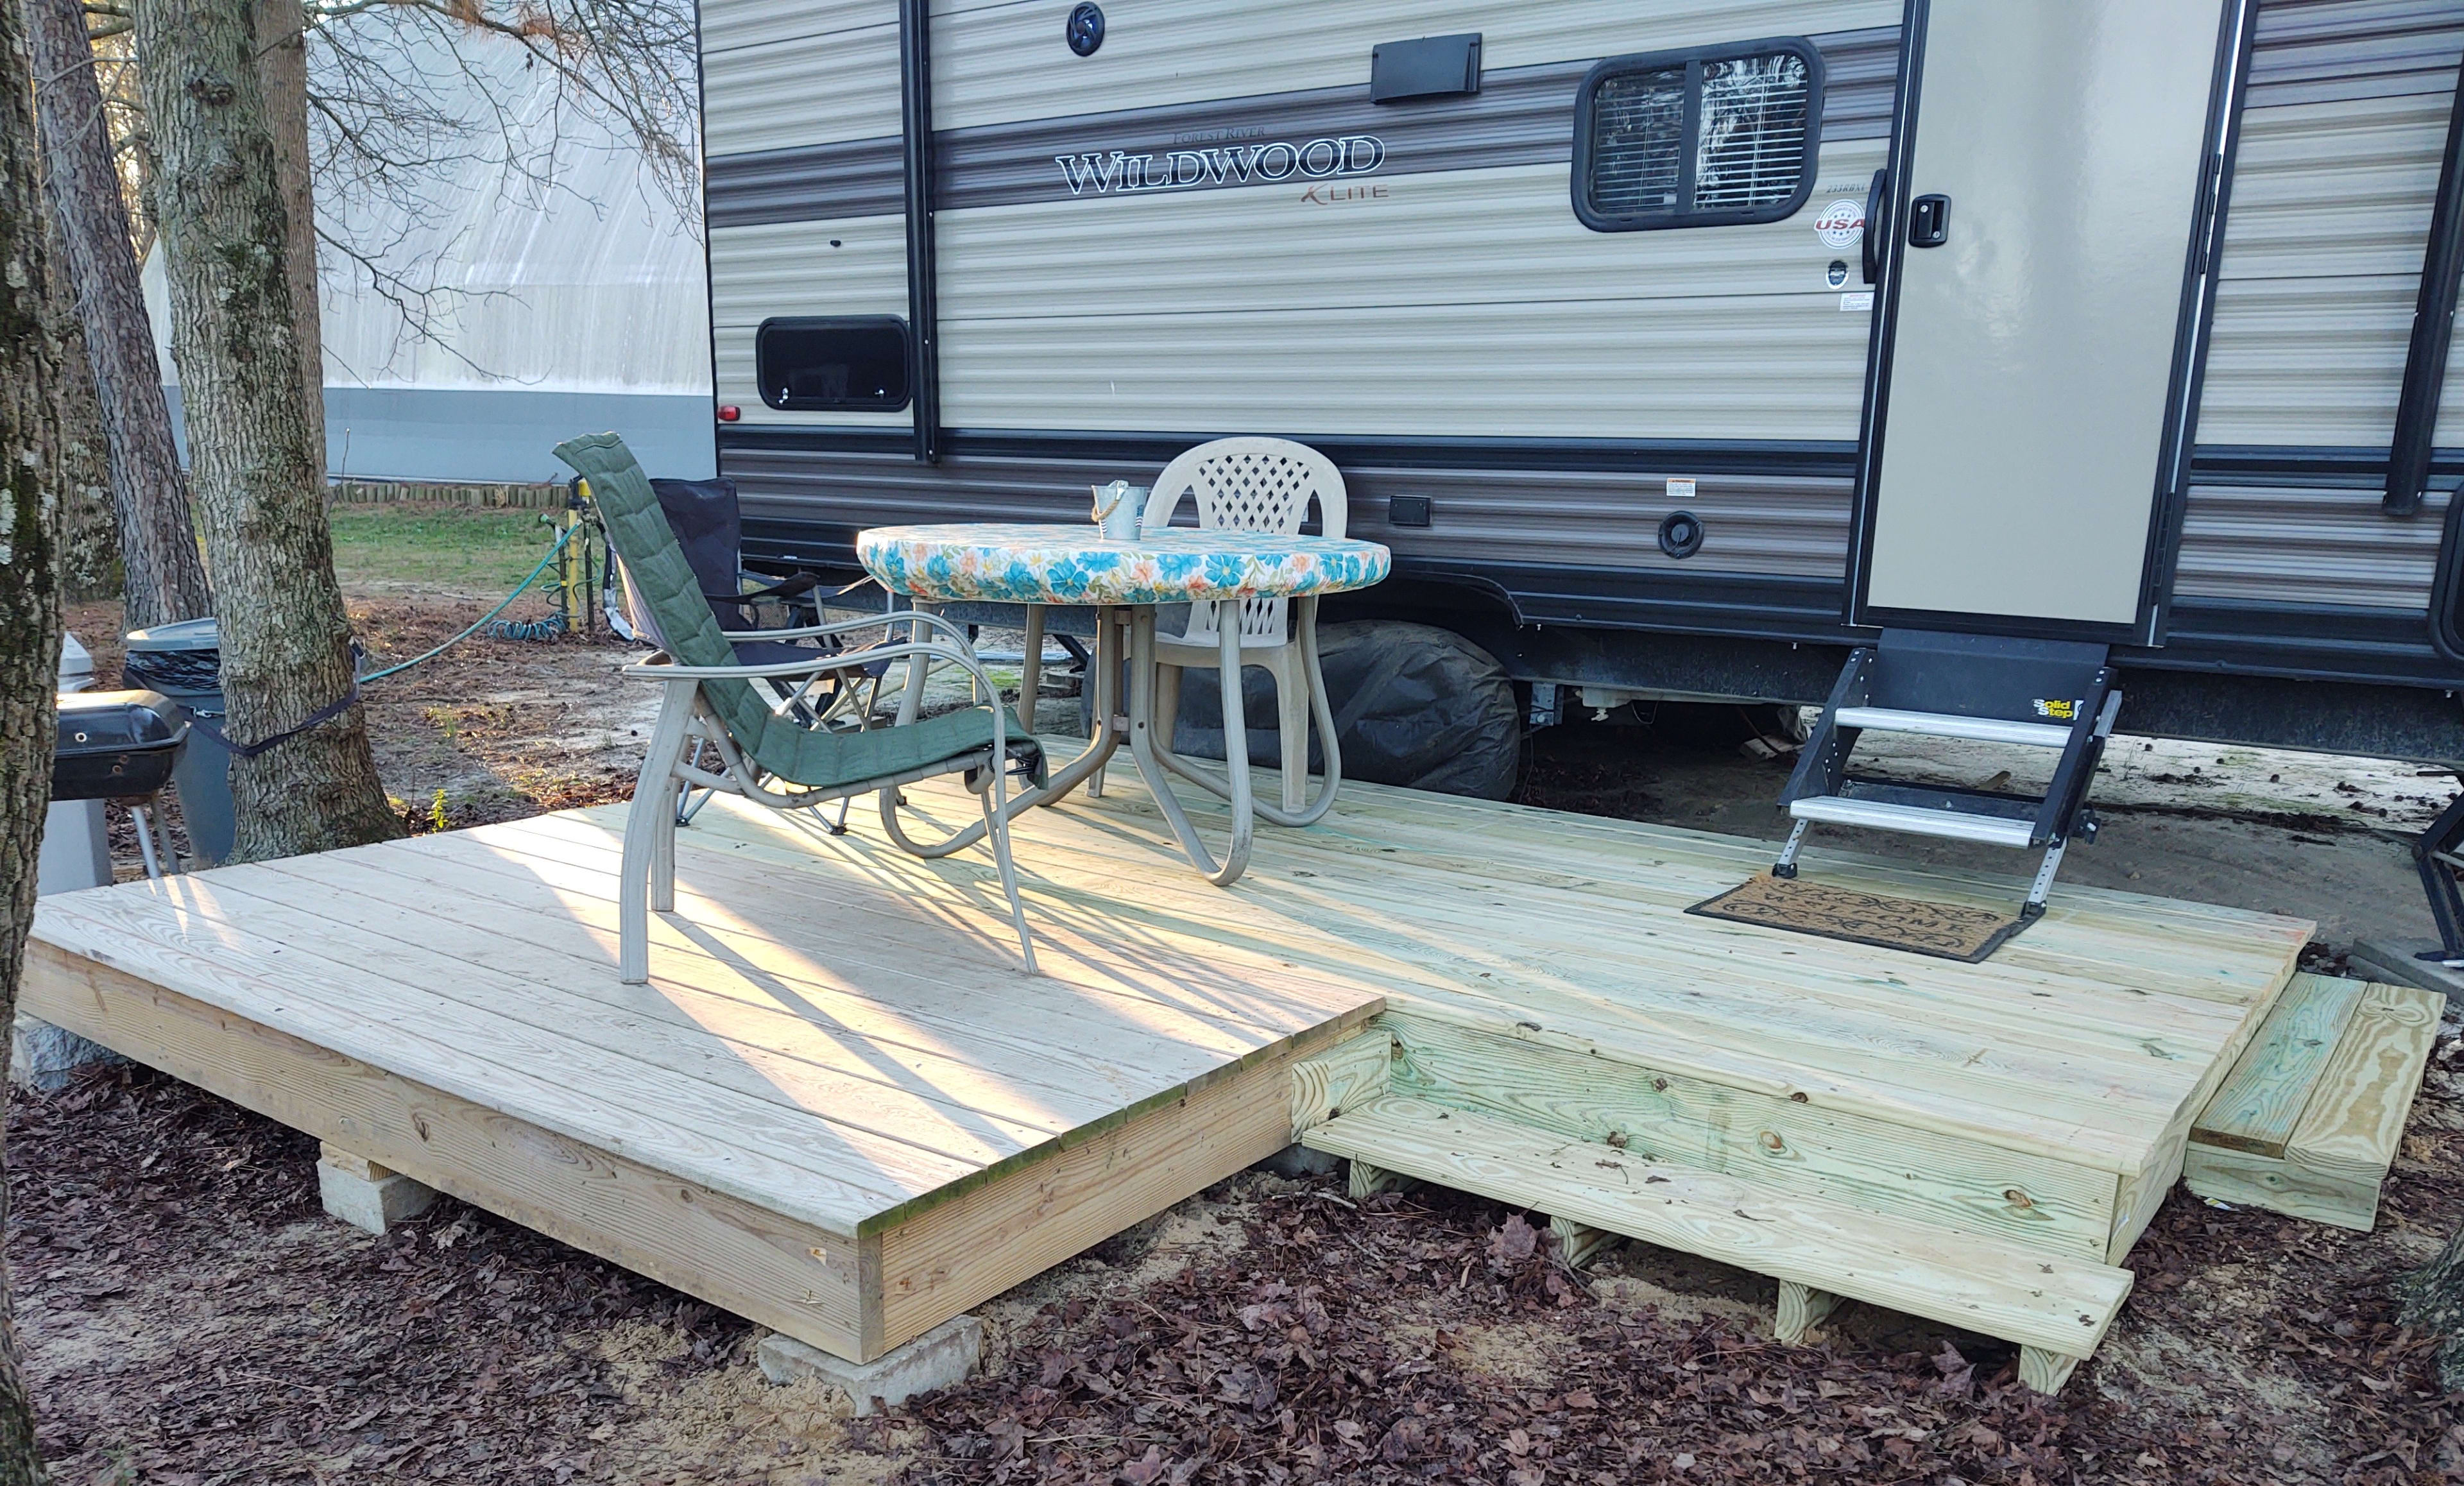 Newly expanded deck area by the RV.